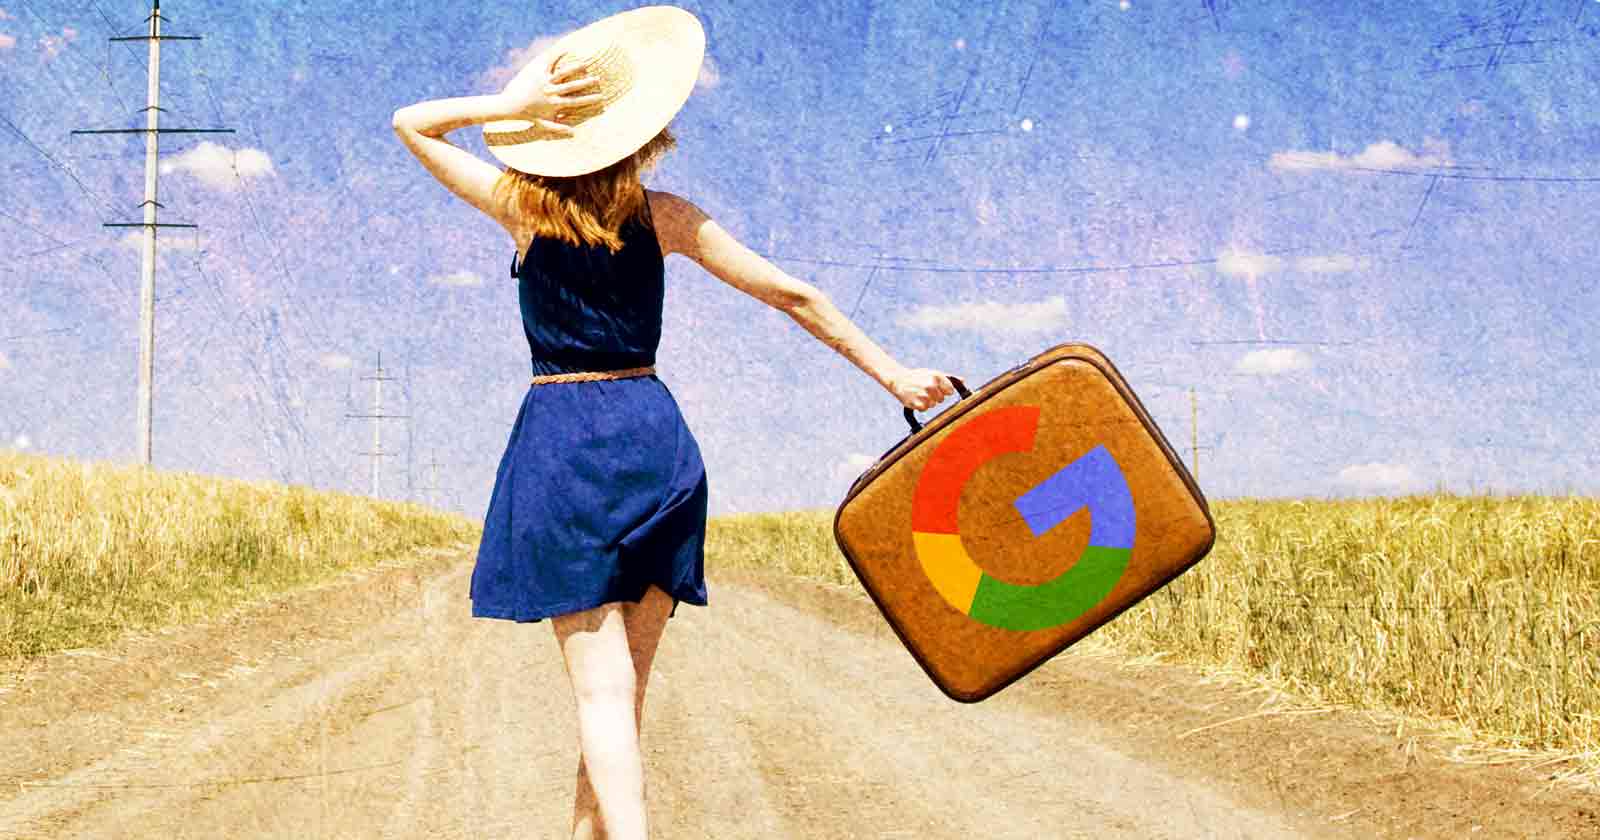 image of a woman on a road with a suitcase that has the Google logo on it